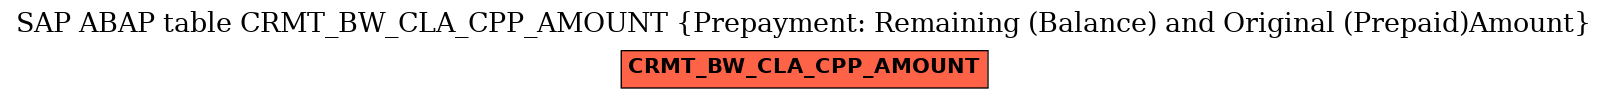 E-R Diagram for table CRMT_BW_CLA_CPP_AMOUNT (Prepayment: Remaining (Balance) and Original (Prepaid)Amount)